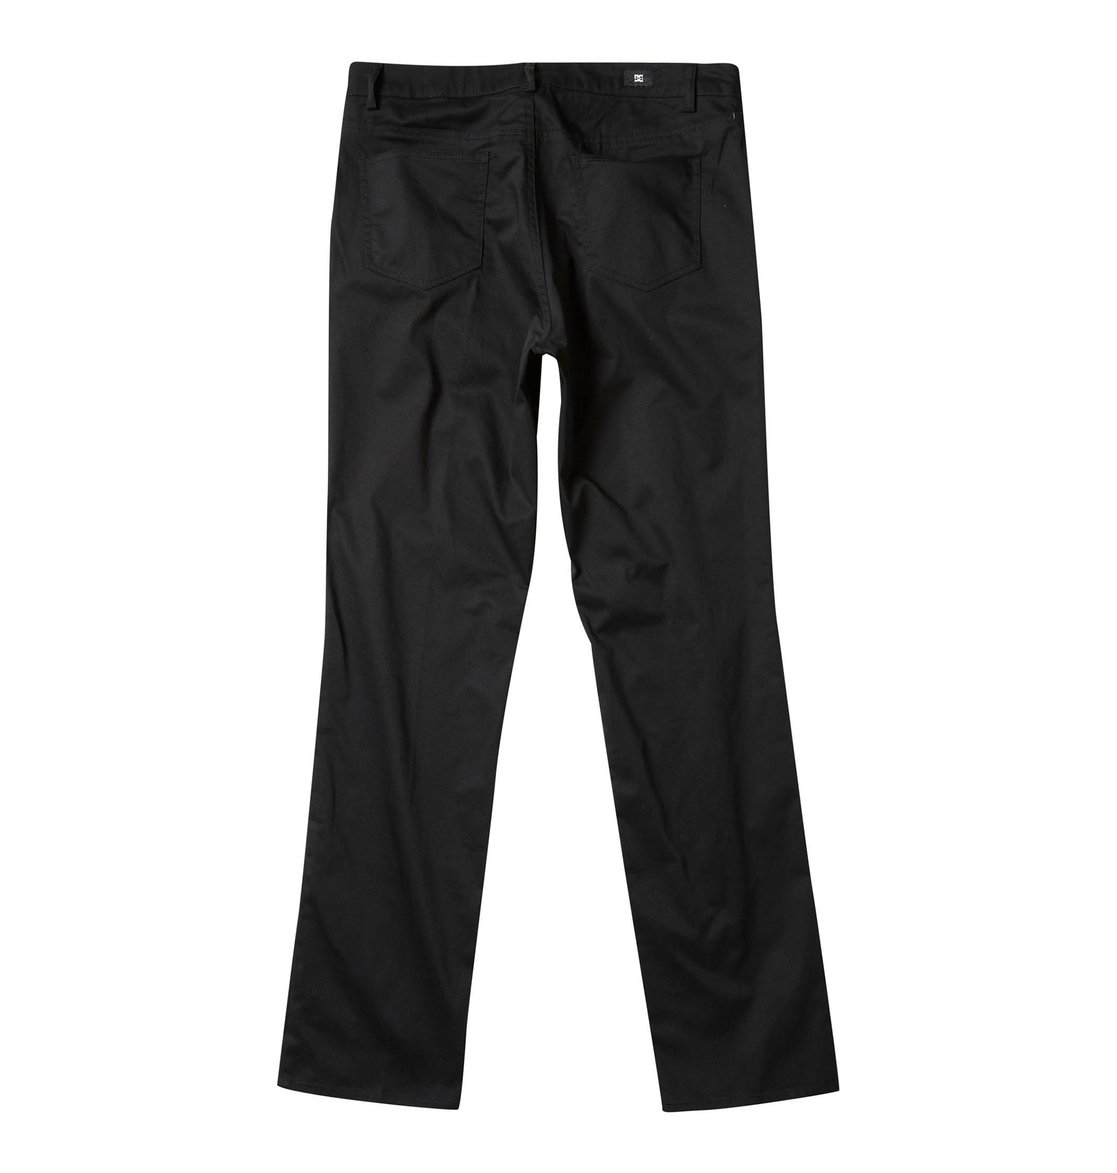 Men's DC Worker Straight Fit Pant ADYNP00001 | DC Shoes